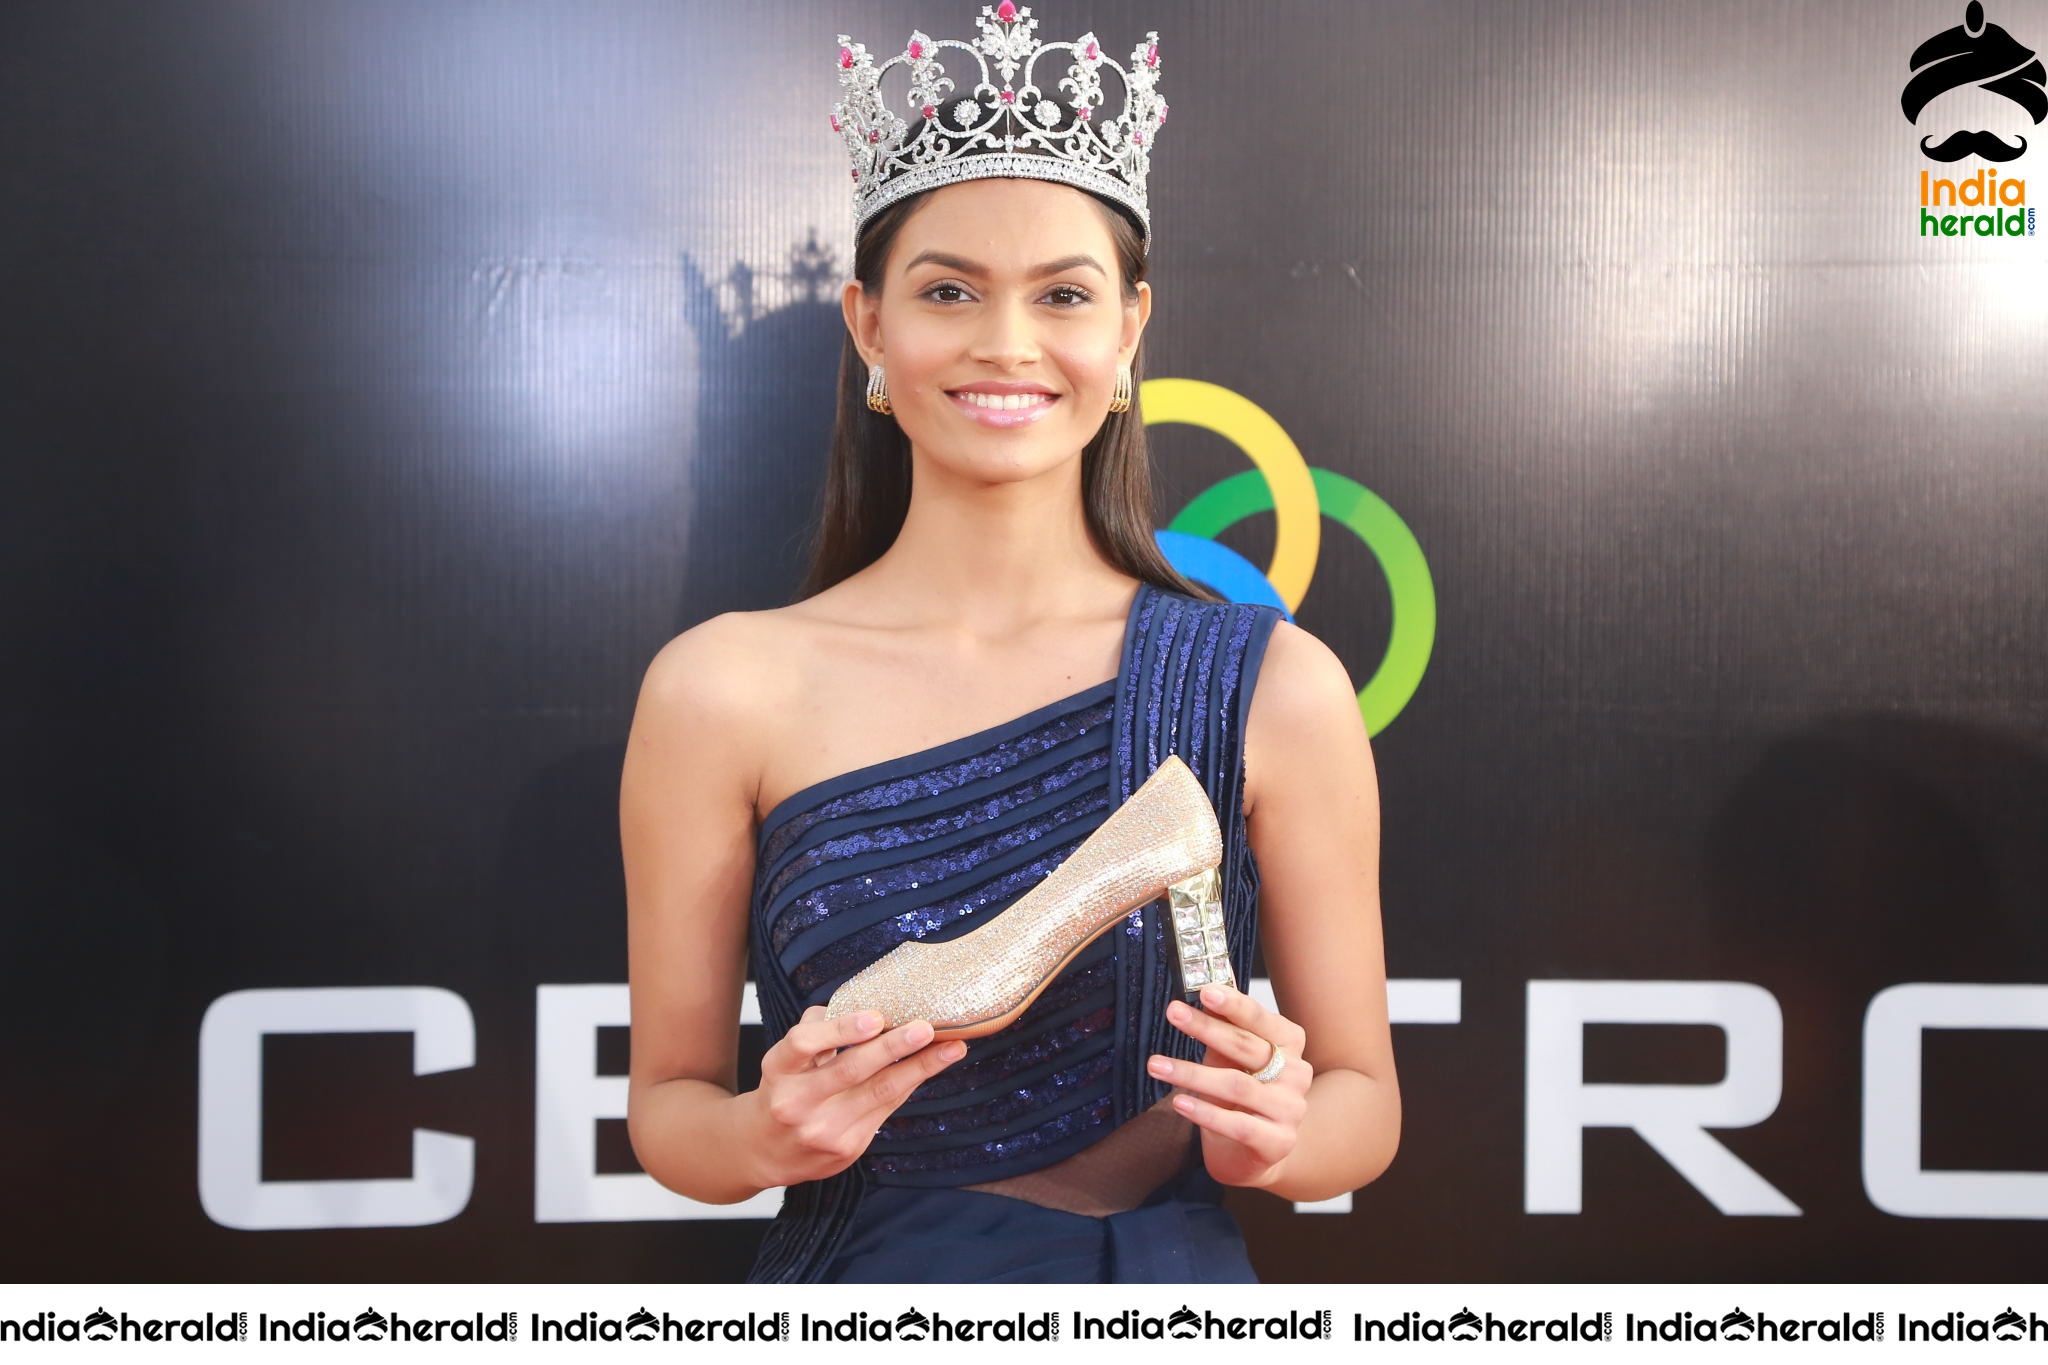 Miss India 2019 Suman Rao Winner Unveiled Wedding And Festive Footwear Collection At Centro Set 2